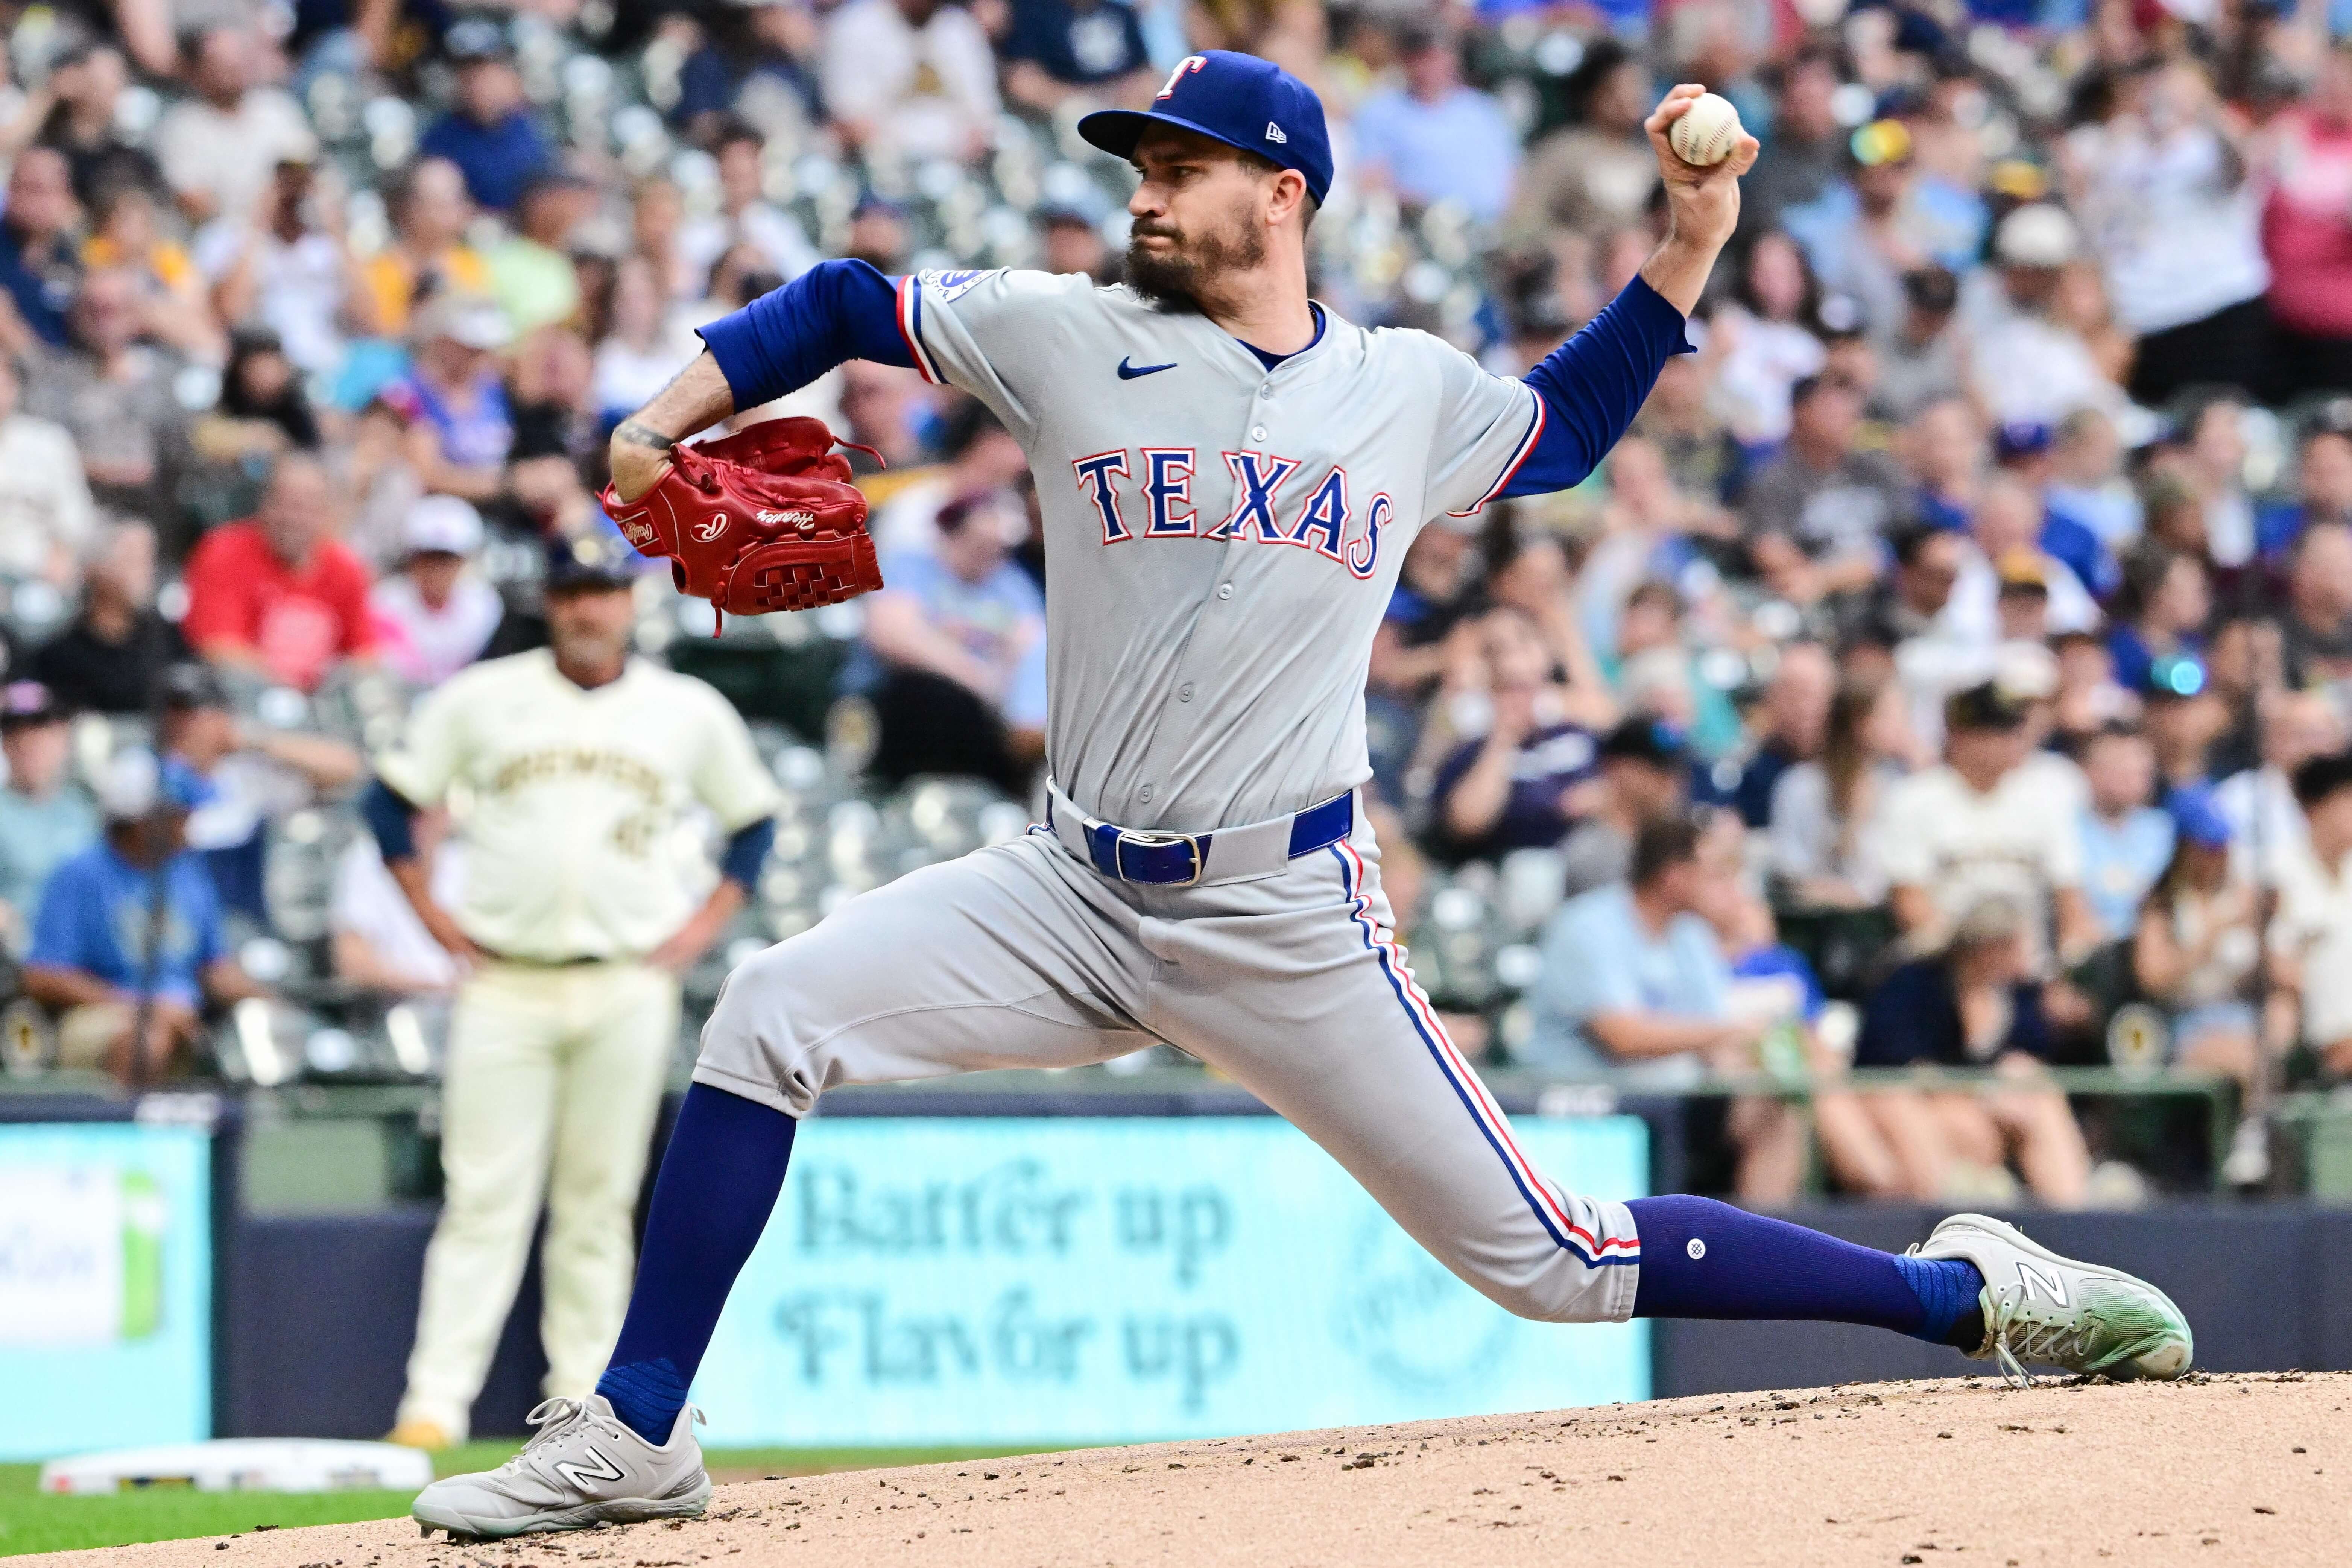 How To Bet - Rangers vs Orioles Sunday Night Baseball Prop Bets: O's Won't Tee Off vs Heaney